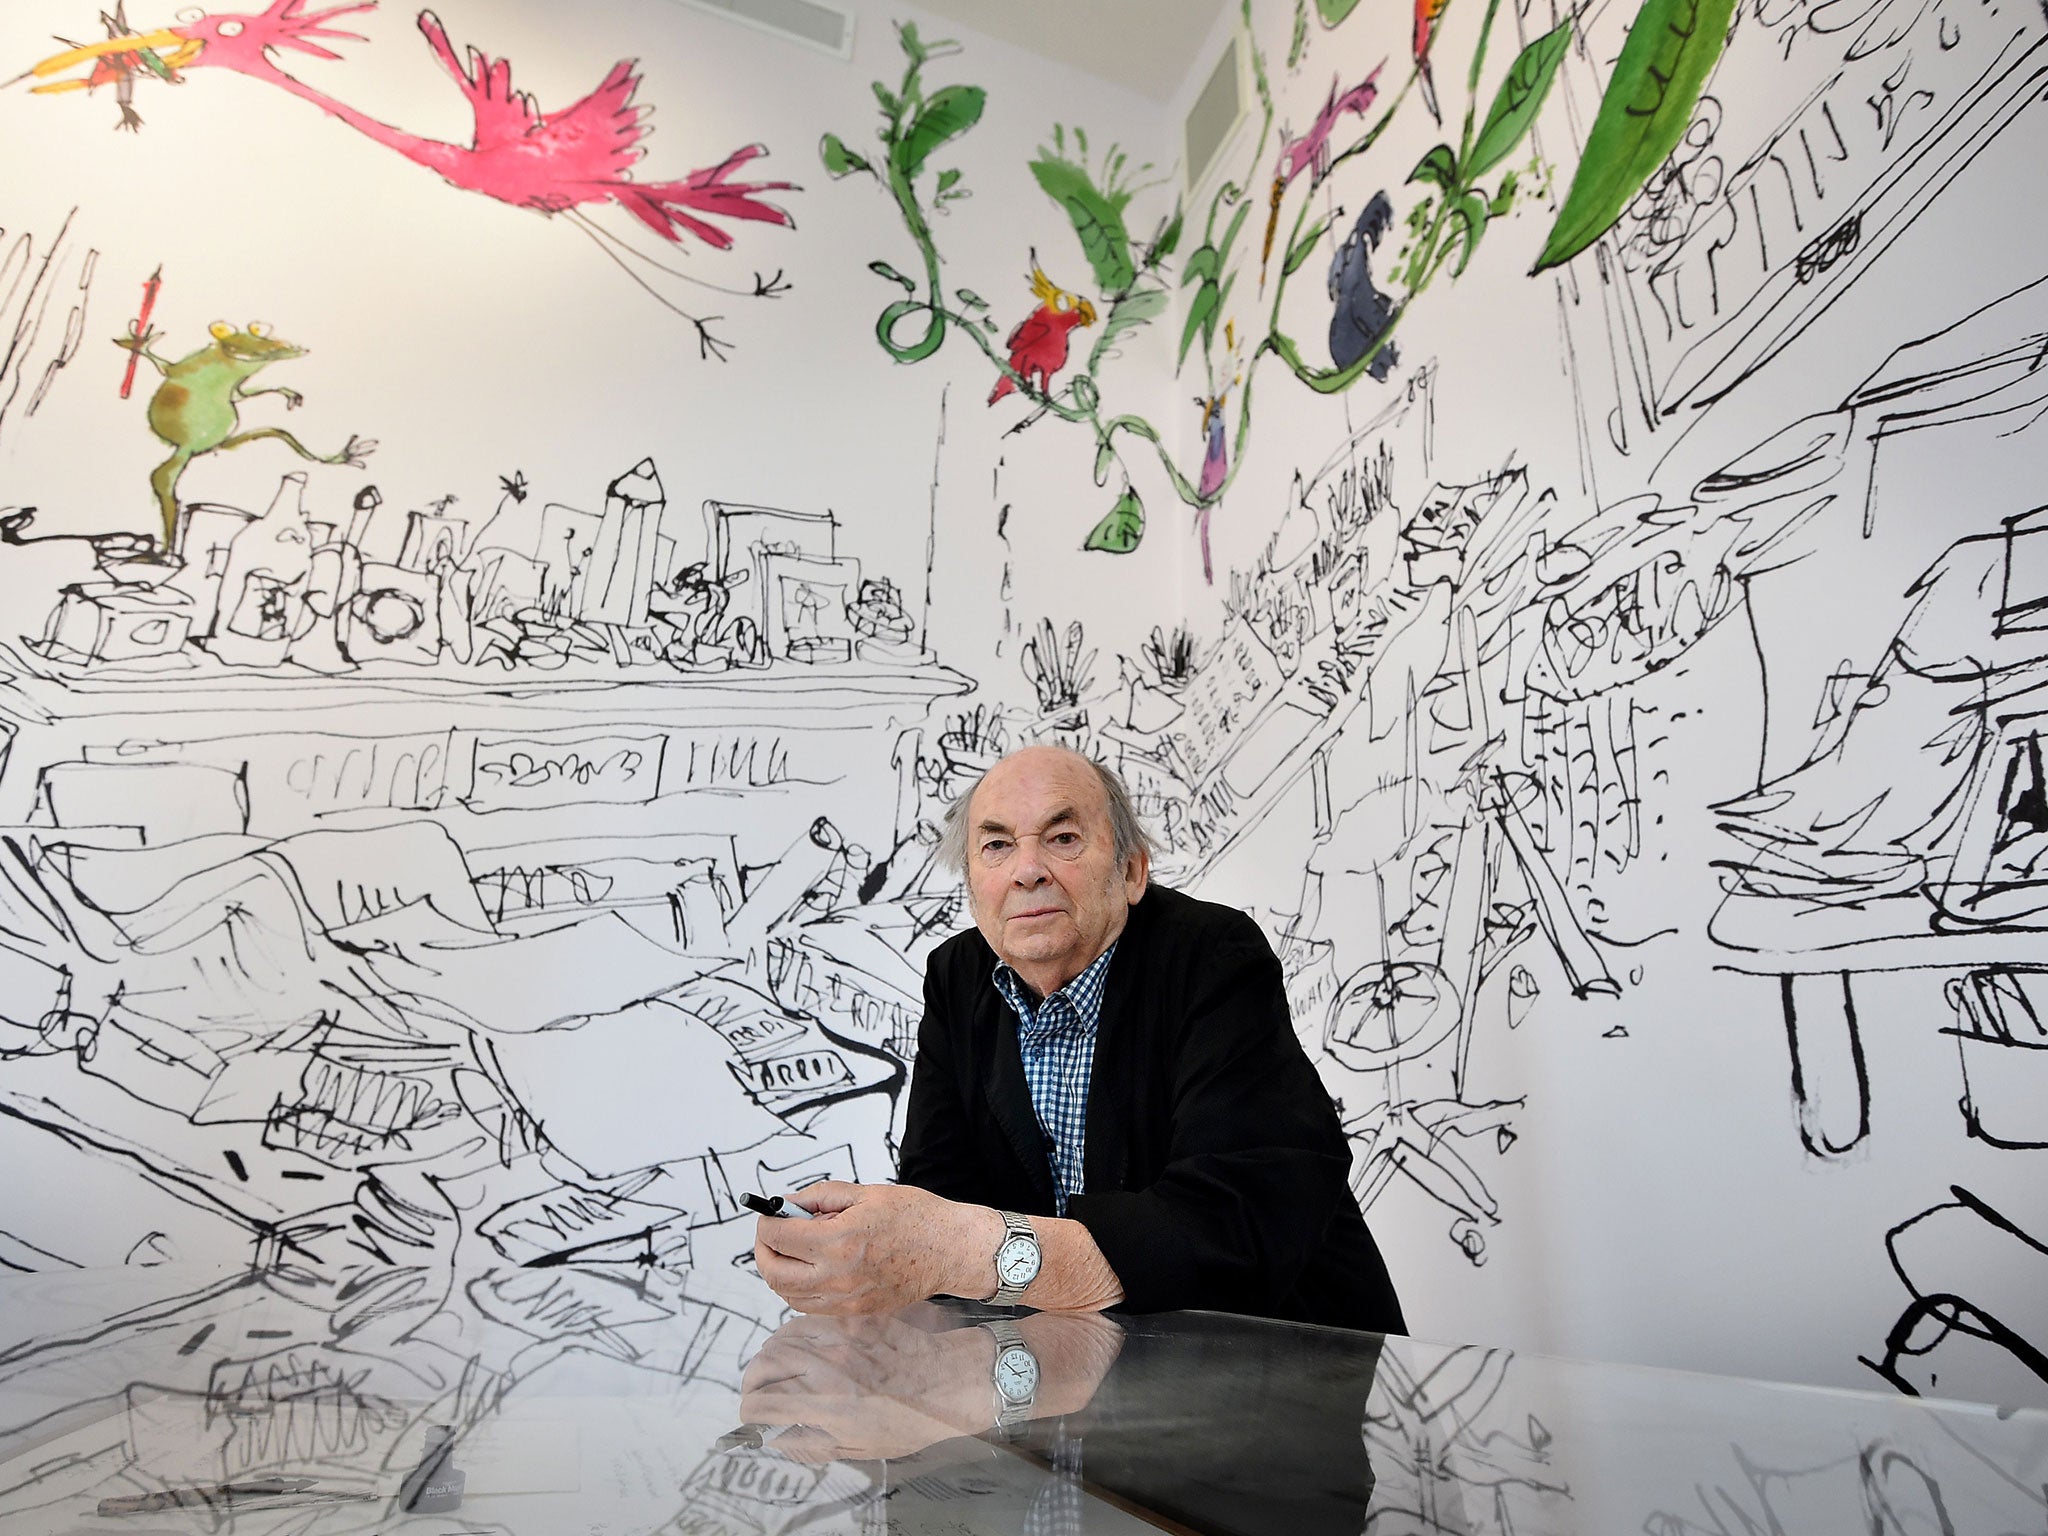 Quentin Blake has written and illustrated a new book that celebrates youngsters with disabilities